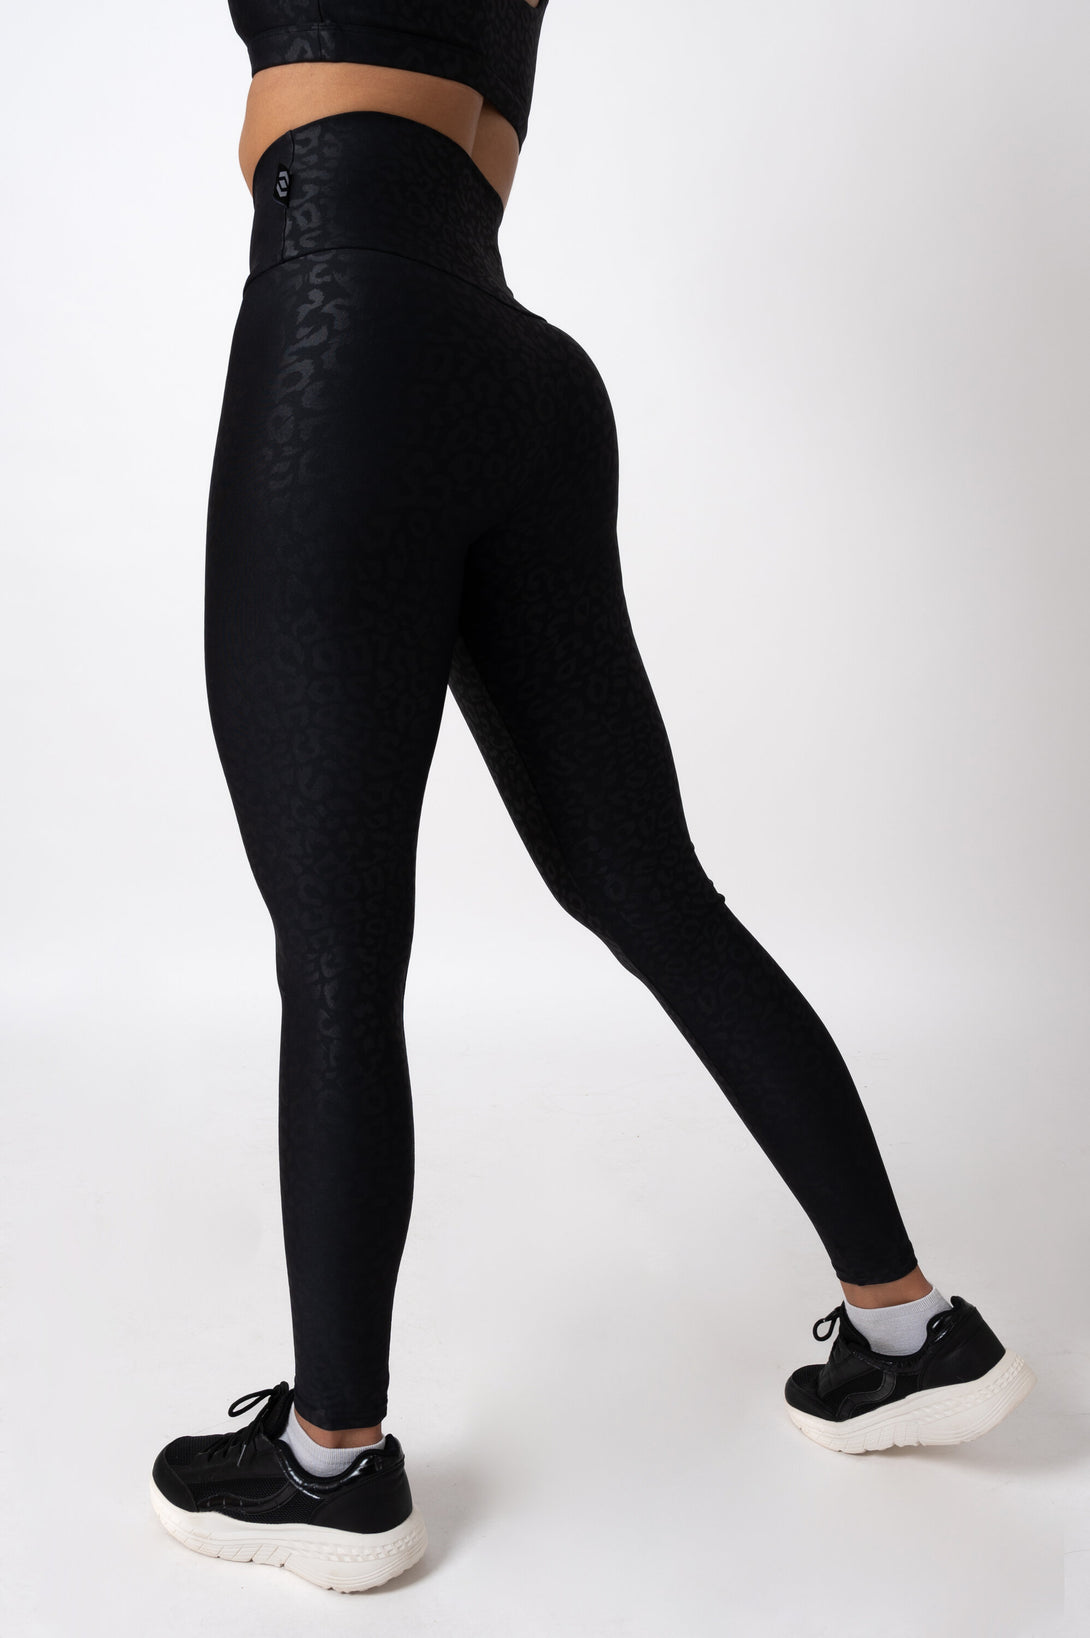 Black Exotic Touch Jag - High Waisted Leggings - Exoticathletica